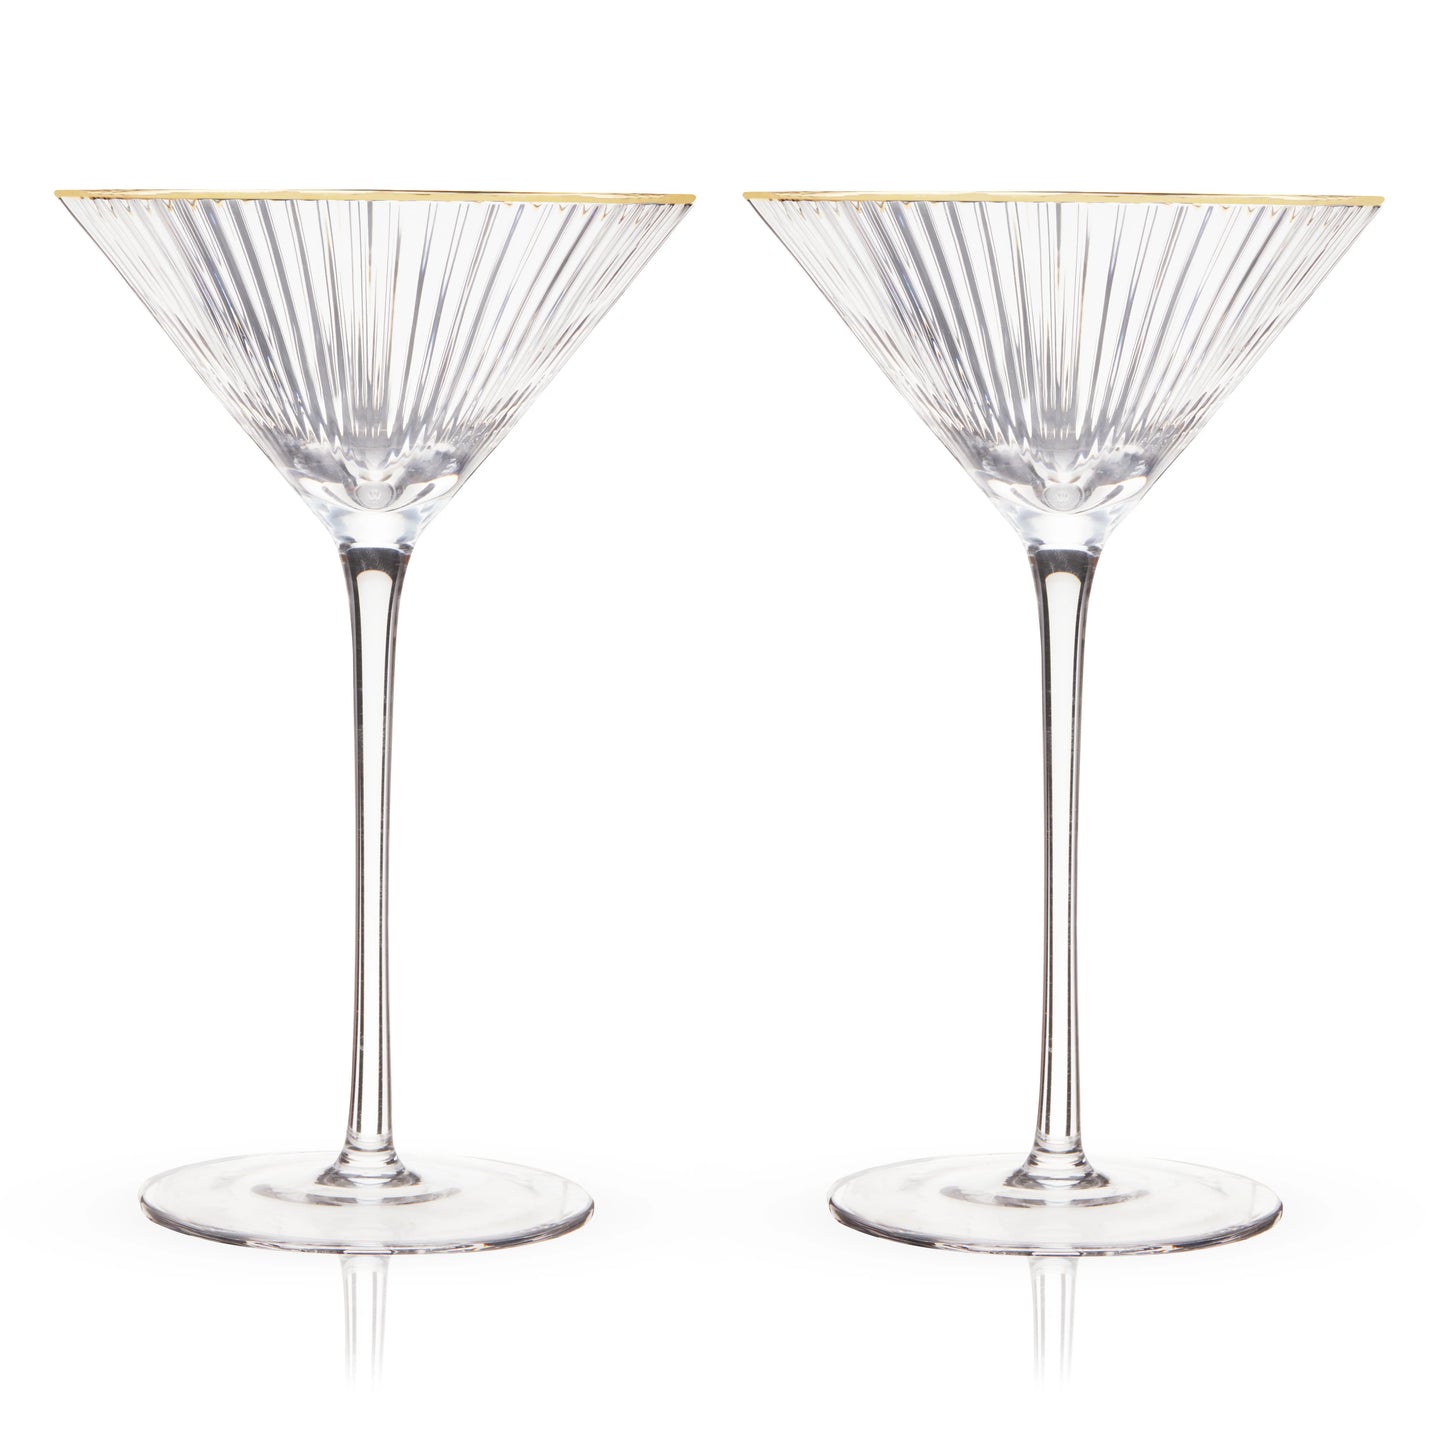 Photo of two crystal martini glasses with rippled texture and gold dipped rims. Portrayed on white background.